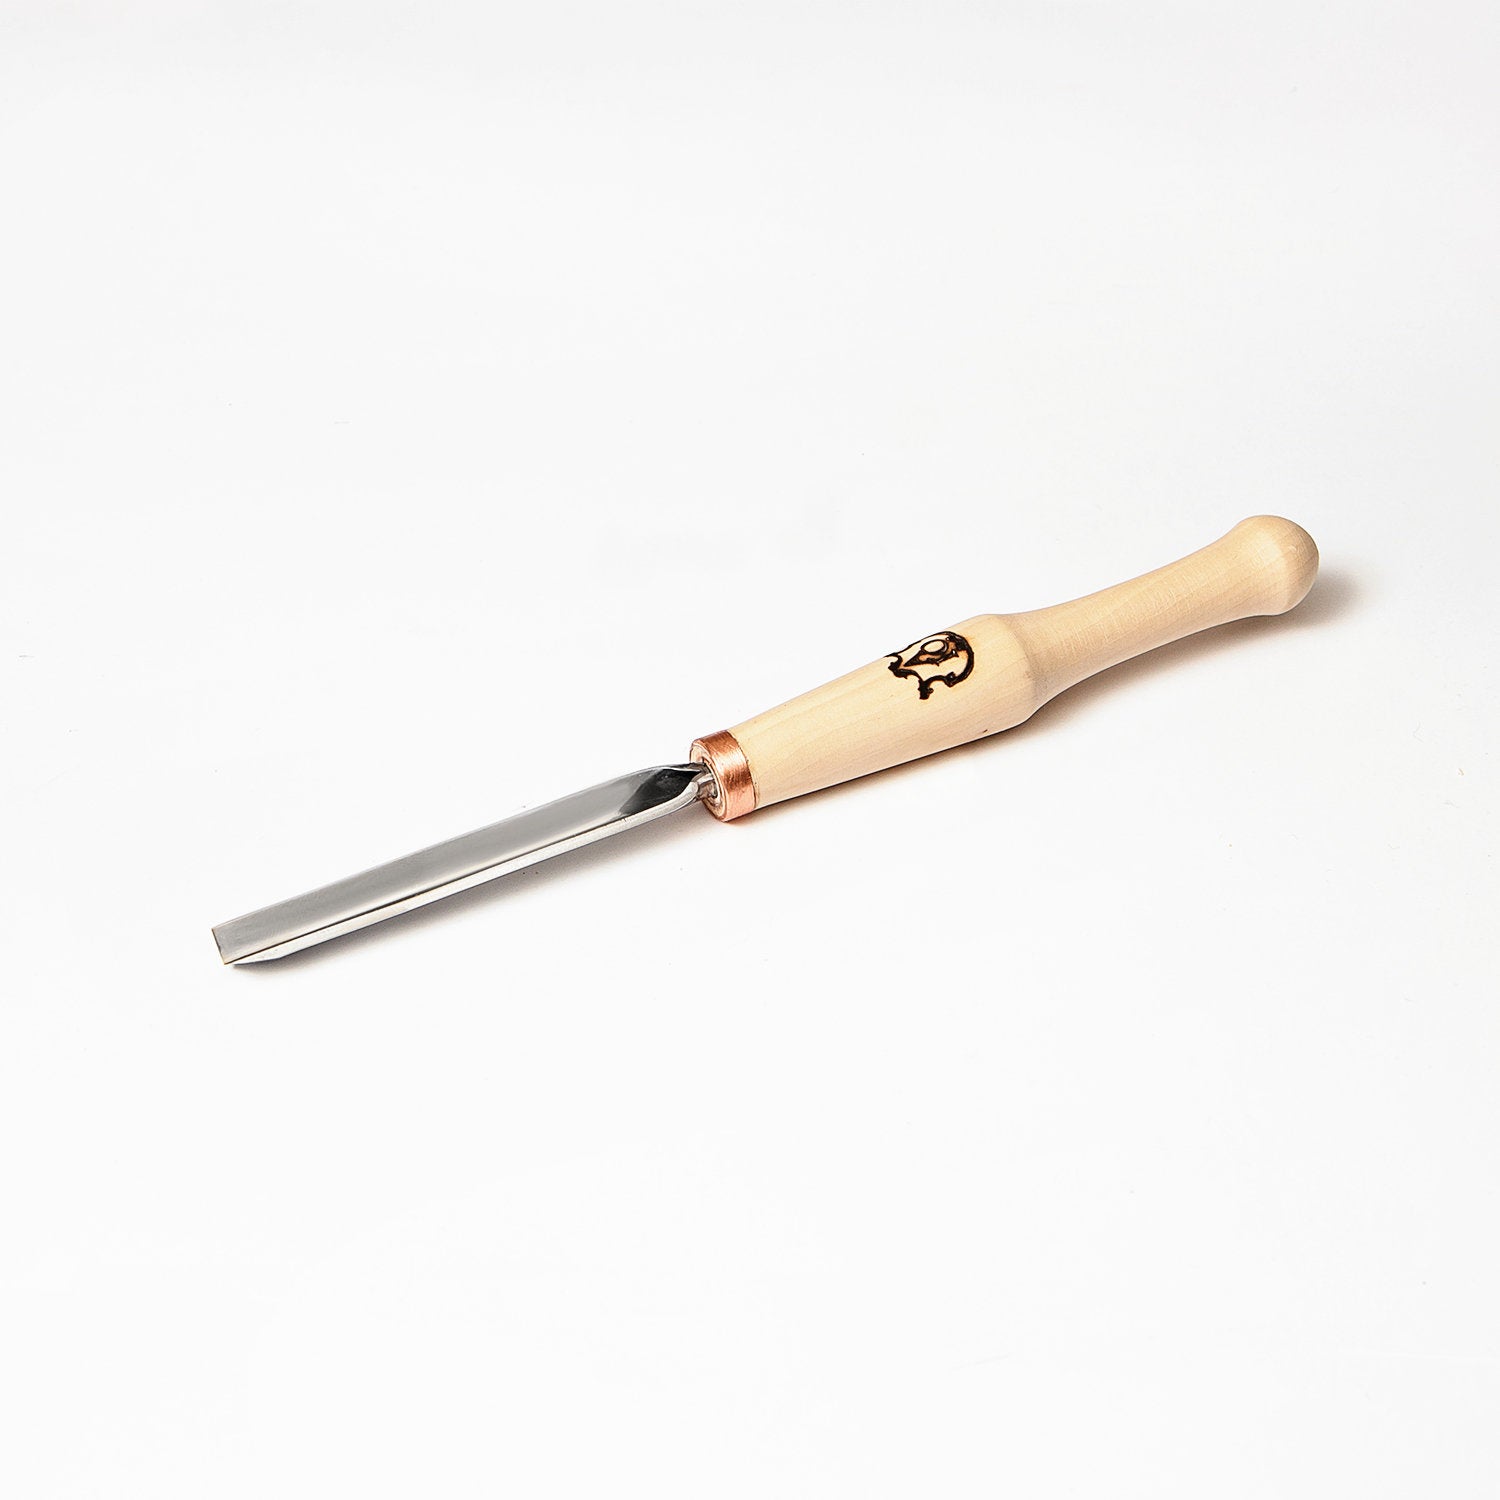 V-parting chisel for chip carving Stryi-AY Profi, knife for